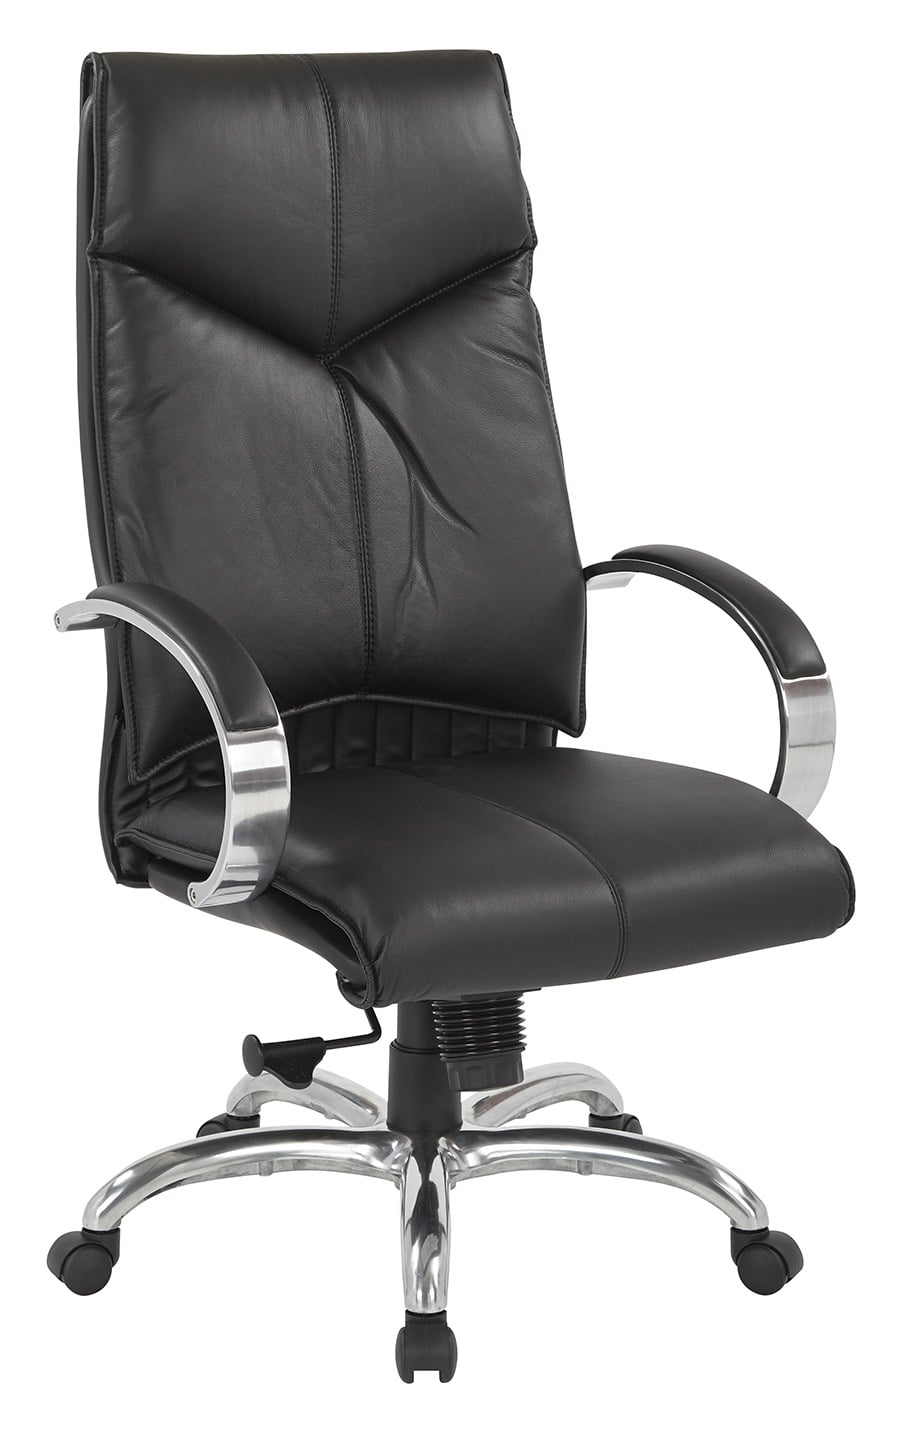 Deluxe High Back Black Chair PnP Office Furniture